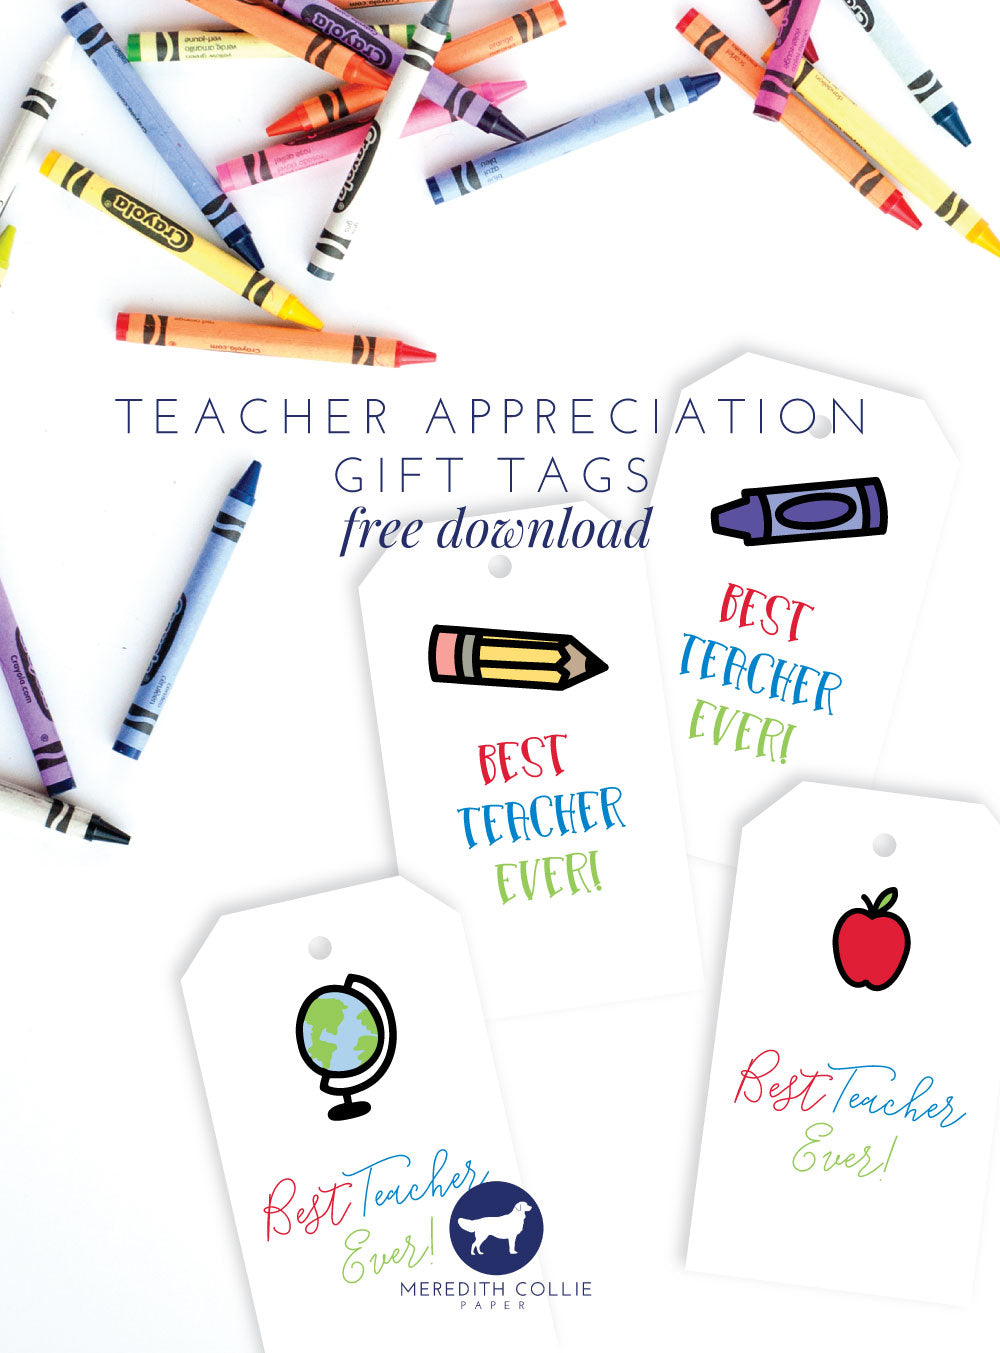 meredith collie paper and design teacher appreciation printables gift tags